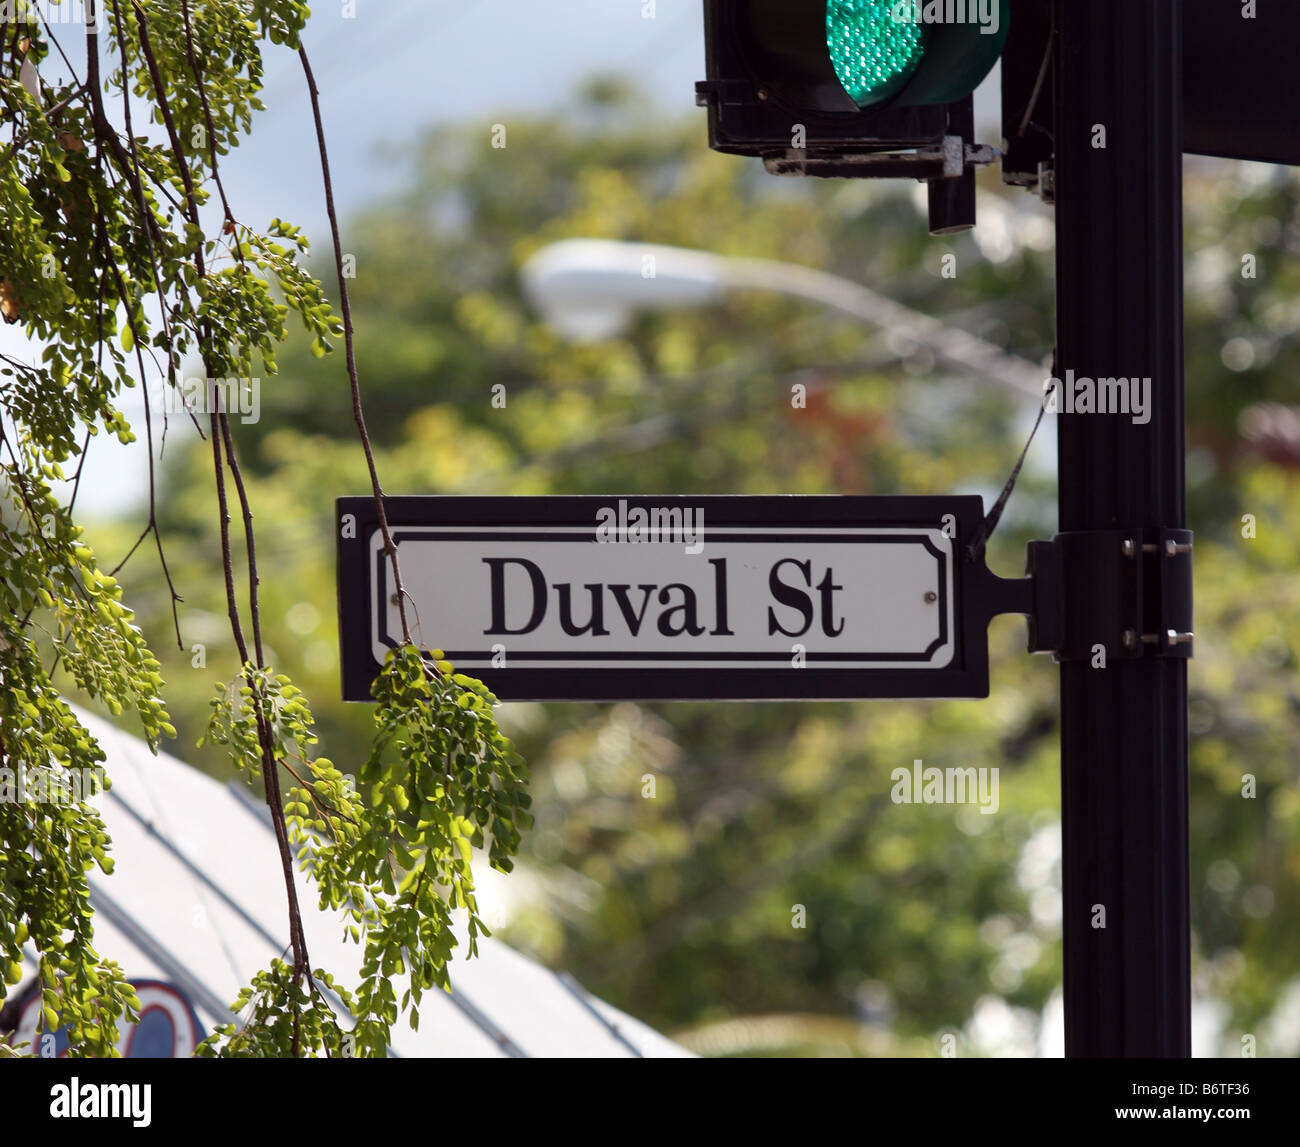 Duval St sign on signpost with green traffic signal in Key West Florida Stock Photo